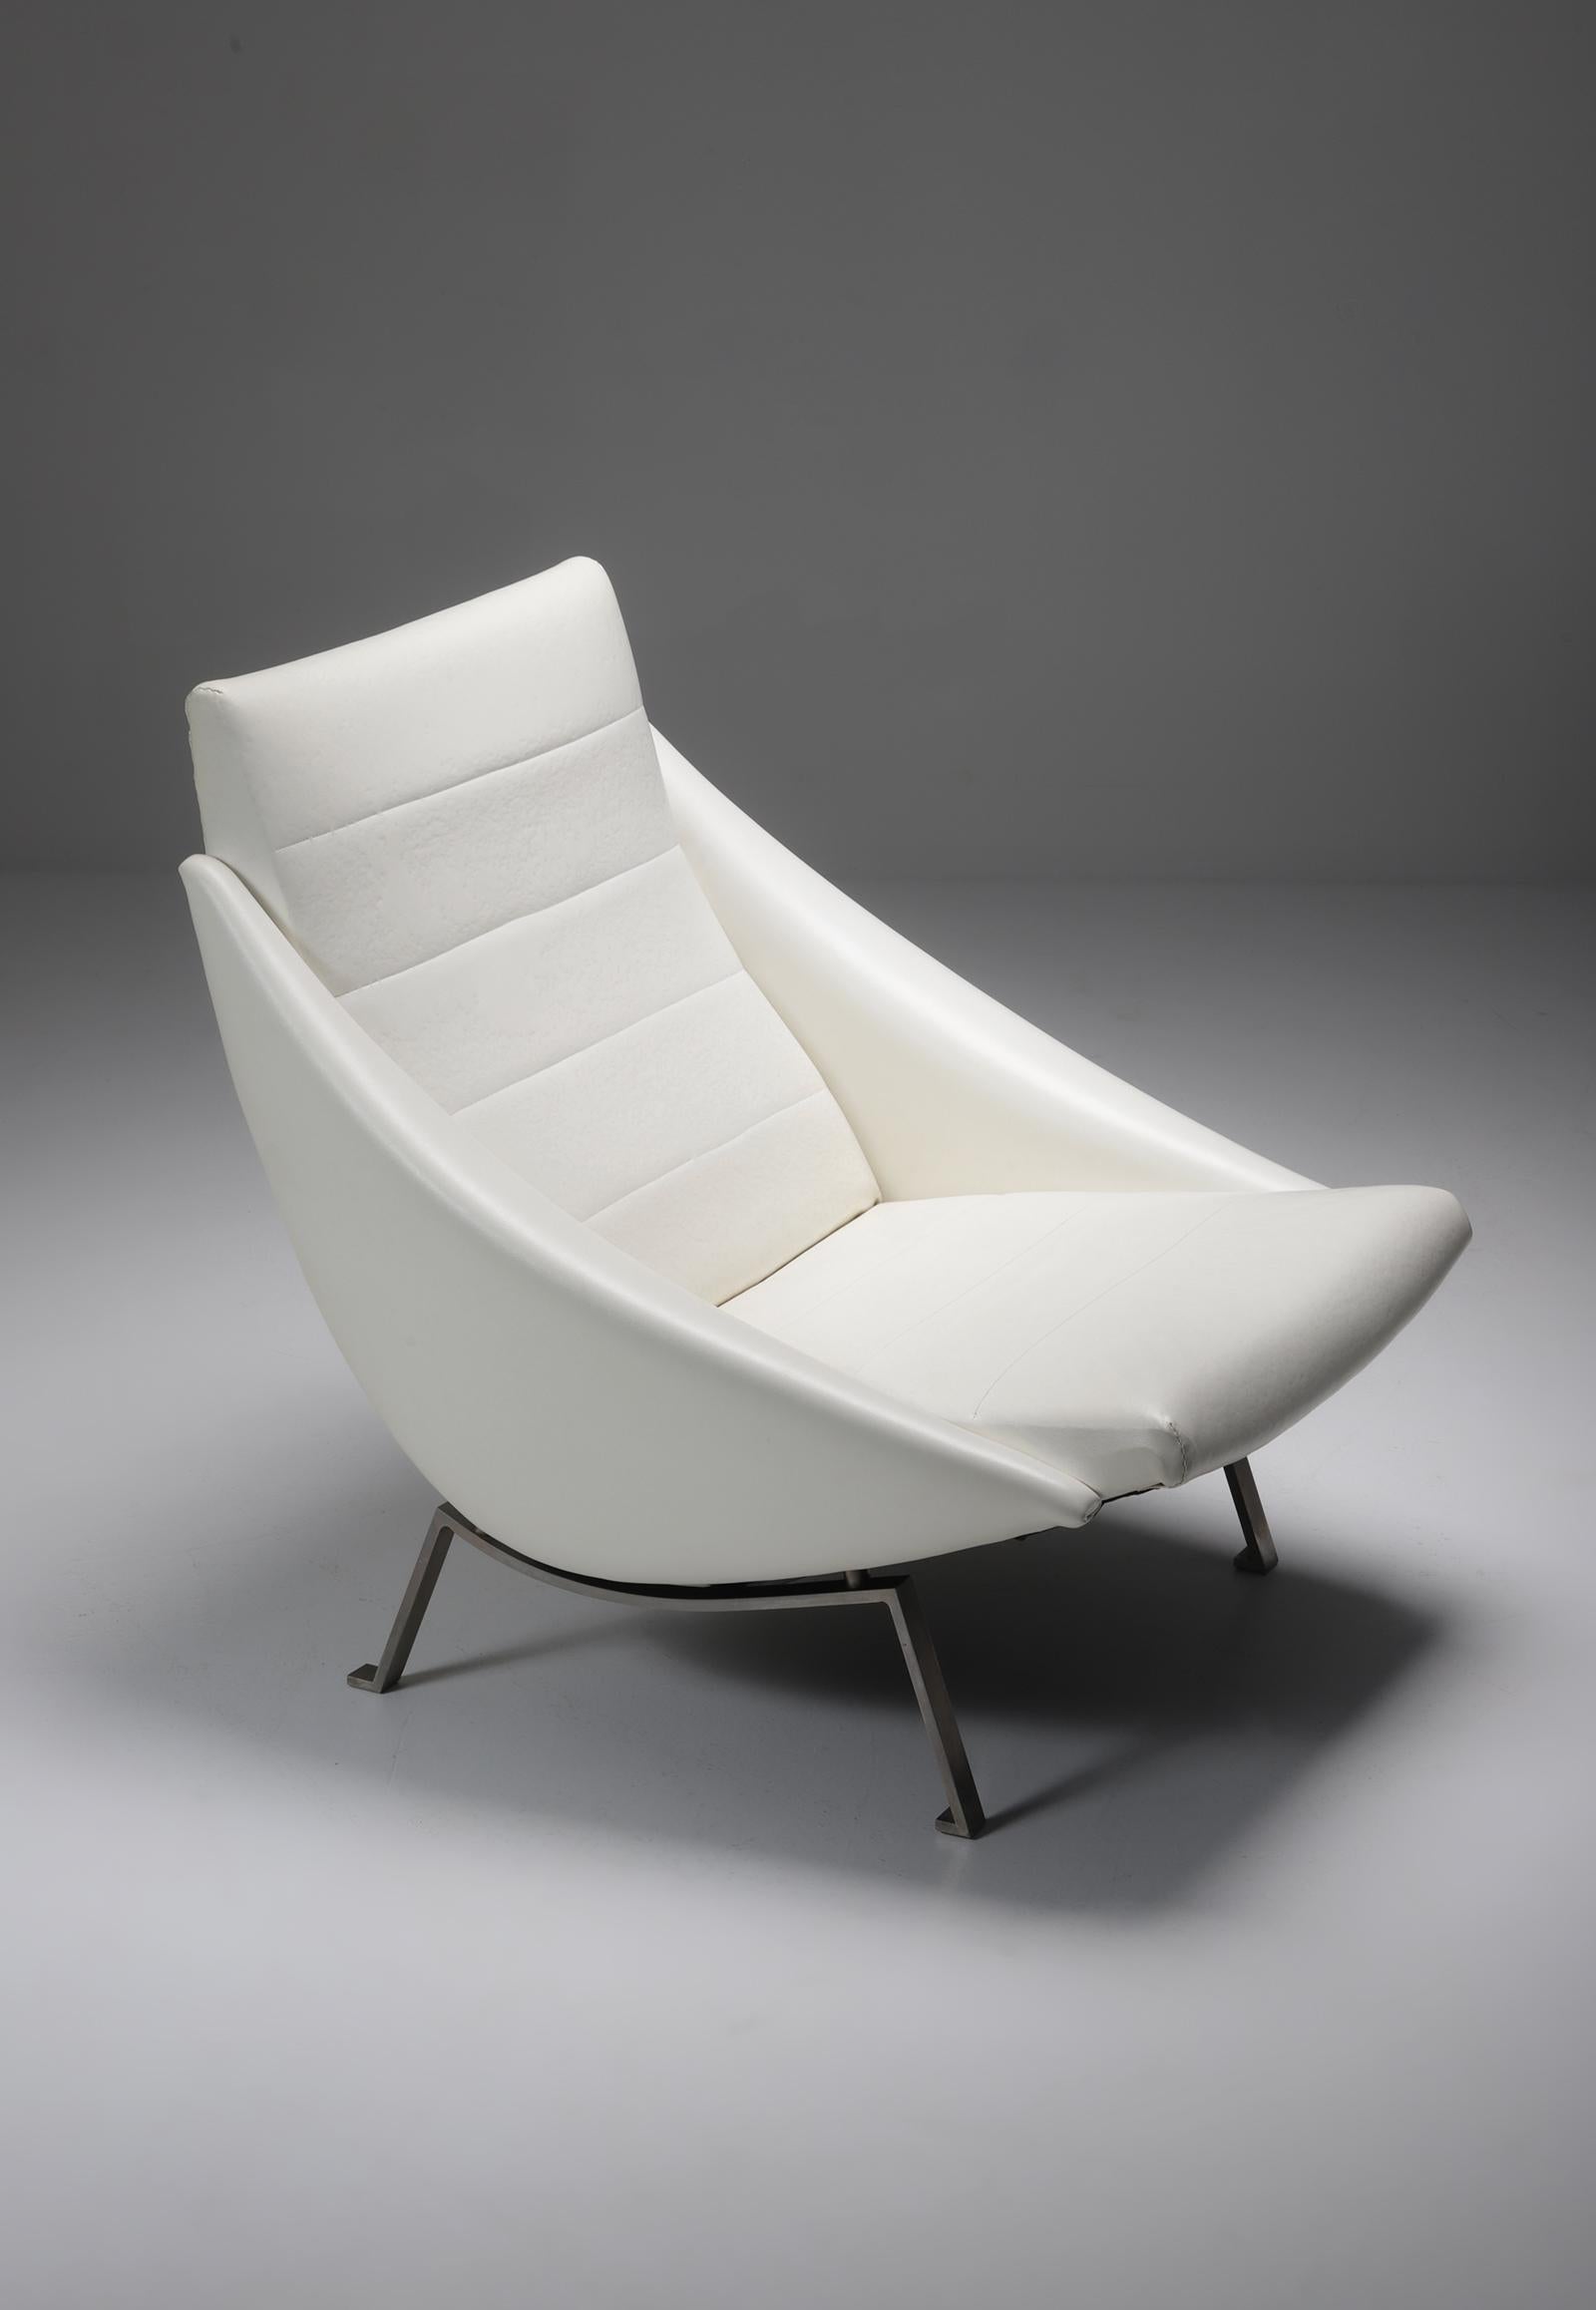 Rare Mid-Century Modernist Lounge Chair in White Original Viny 1950 In Good Condition For Sale In Antwerpen, Antwerp